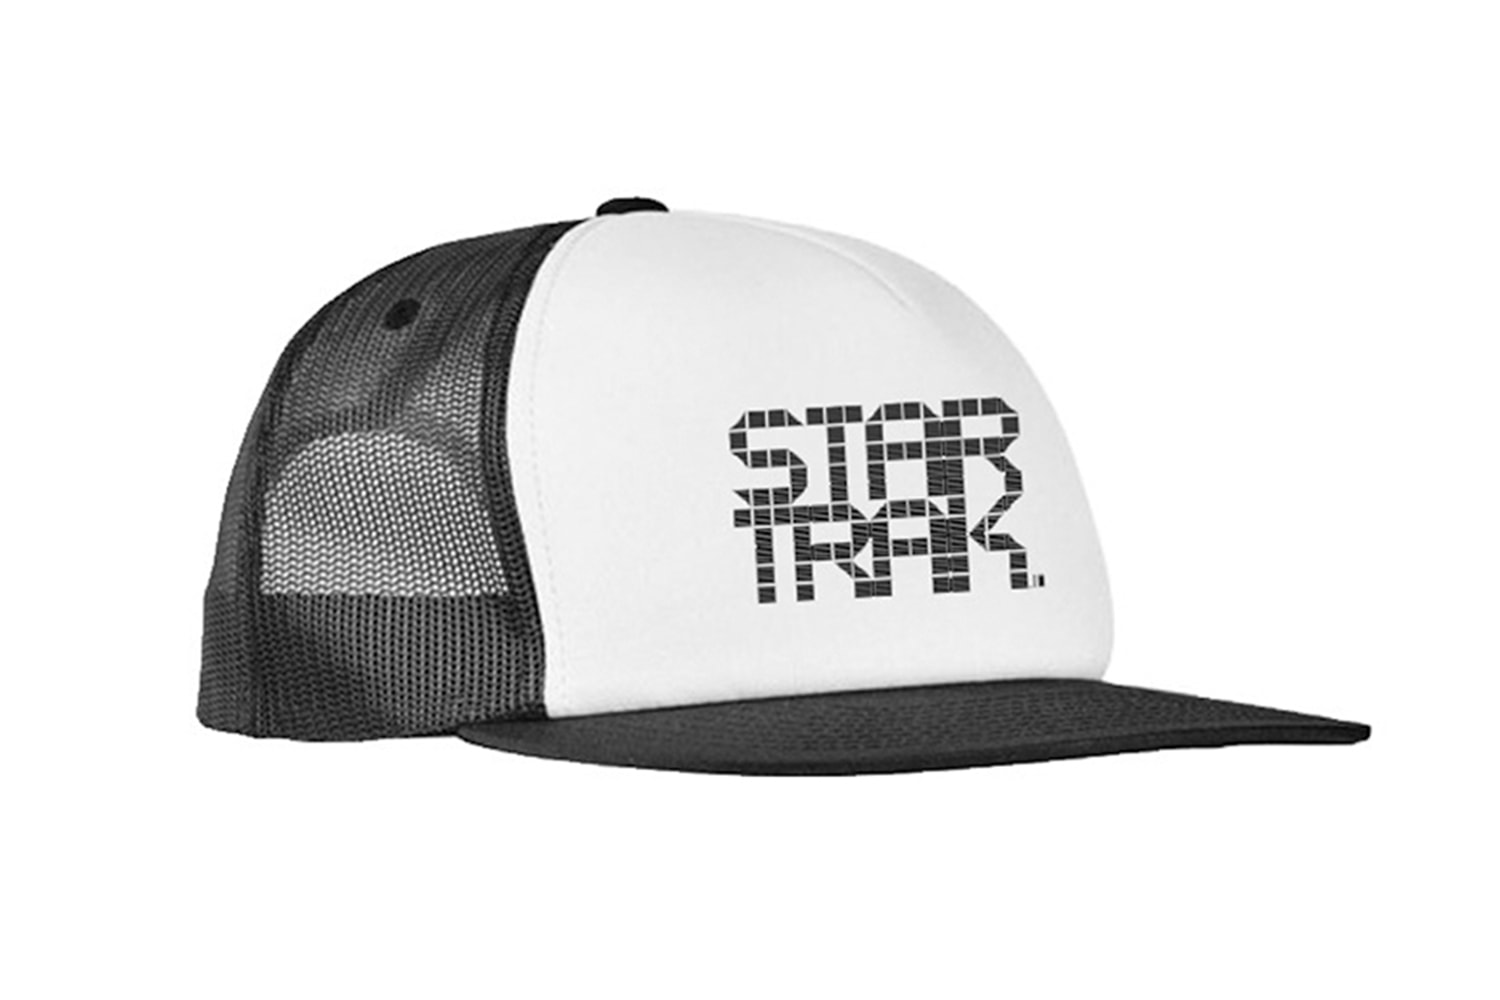 Star Trak Inaugural Merch Collection Drop 2 Release Info Date Buy Price